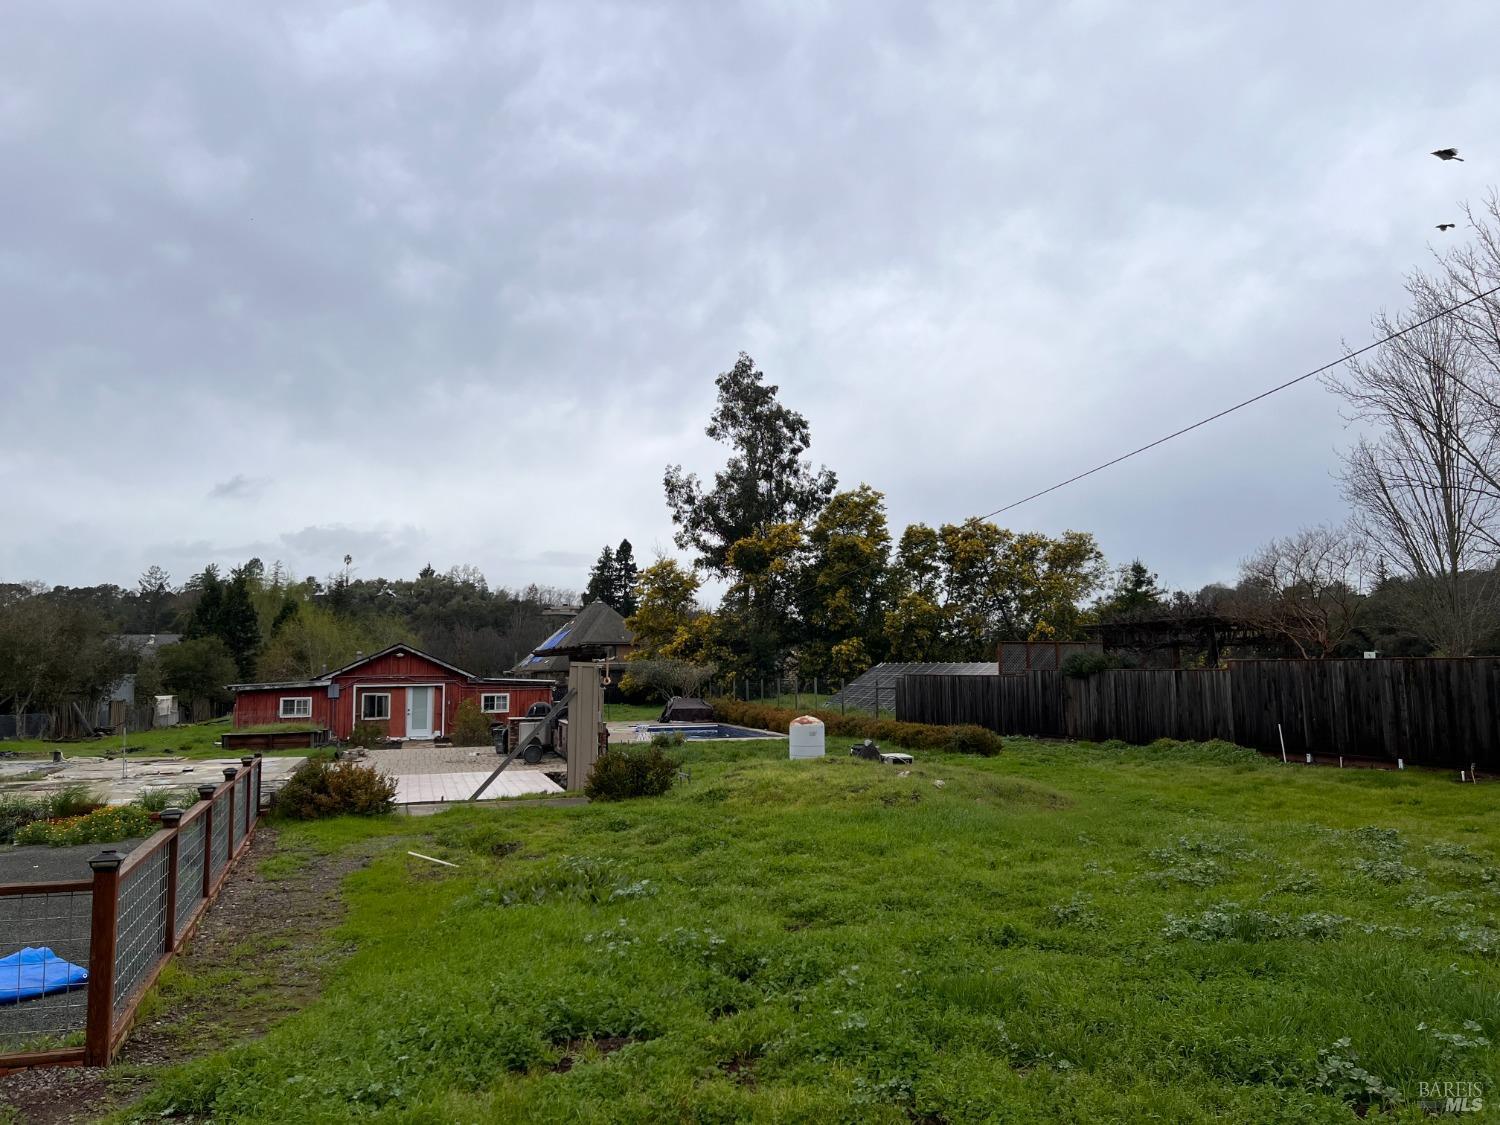 4056 3rd Ave, Napa, California, 94558, United States, 3 Bedrooms Bedrooms, ,2 BathroomsBathrooms,Residential,For Sale,4056 3rd Ave,1474388